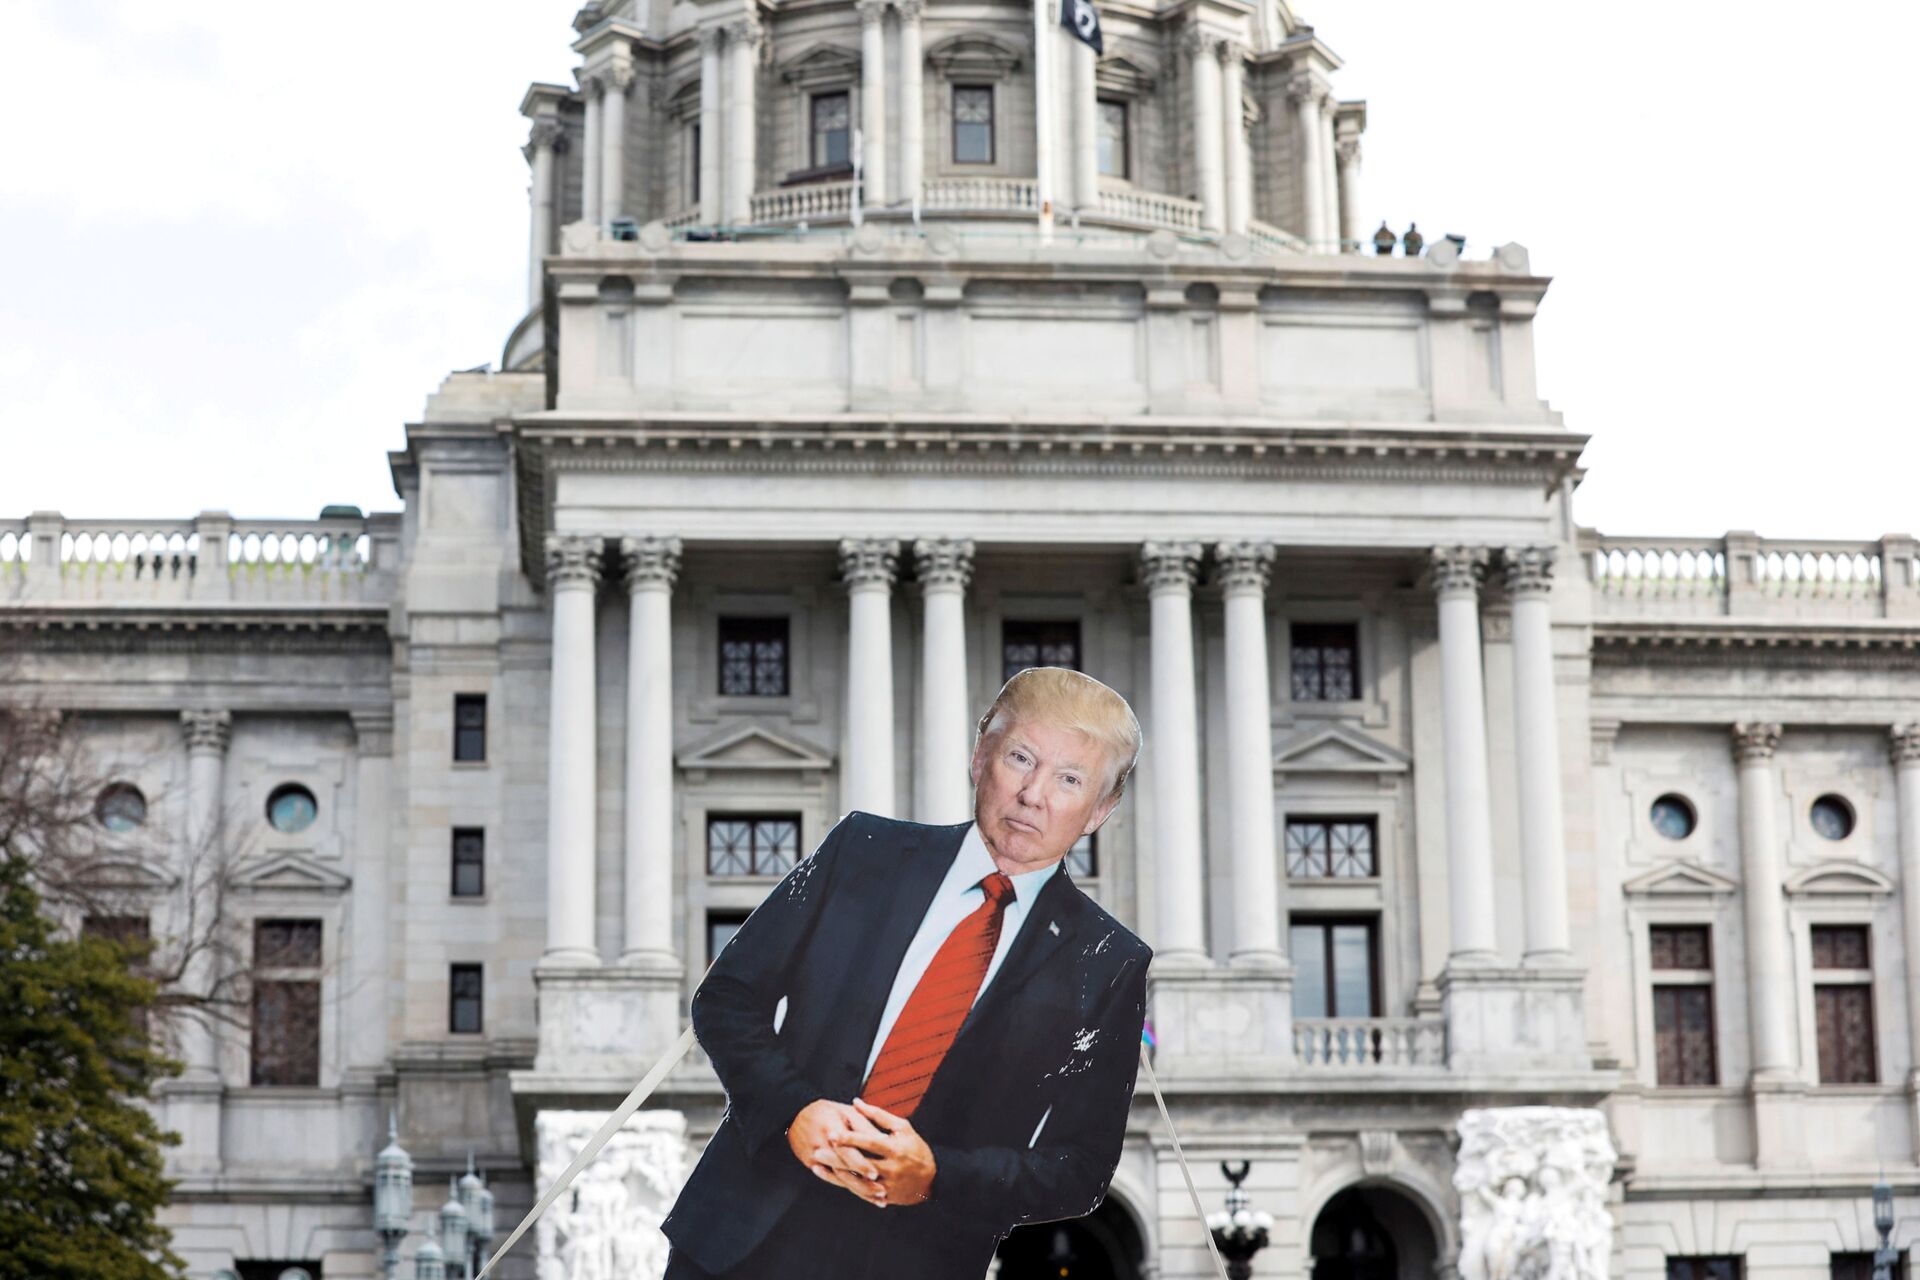 A cardboard cutout depicting U.S. President Donald Trump is seen in front of Pennsylvania State Capitol, as supporters of him are expected to protest against the election of President-elect Joe Biden, outside the Pennsylvania State Capitol in Harrisburg, Pennsylvania, U.S. January 17, 2021 - Sputnik International, 1920, 07.09.2021